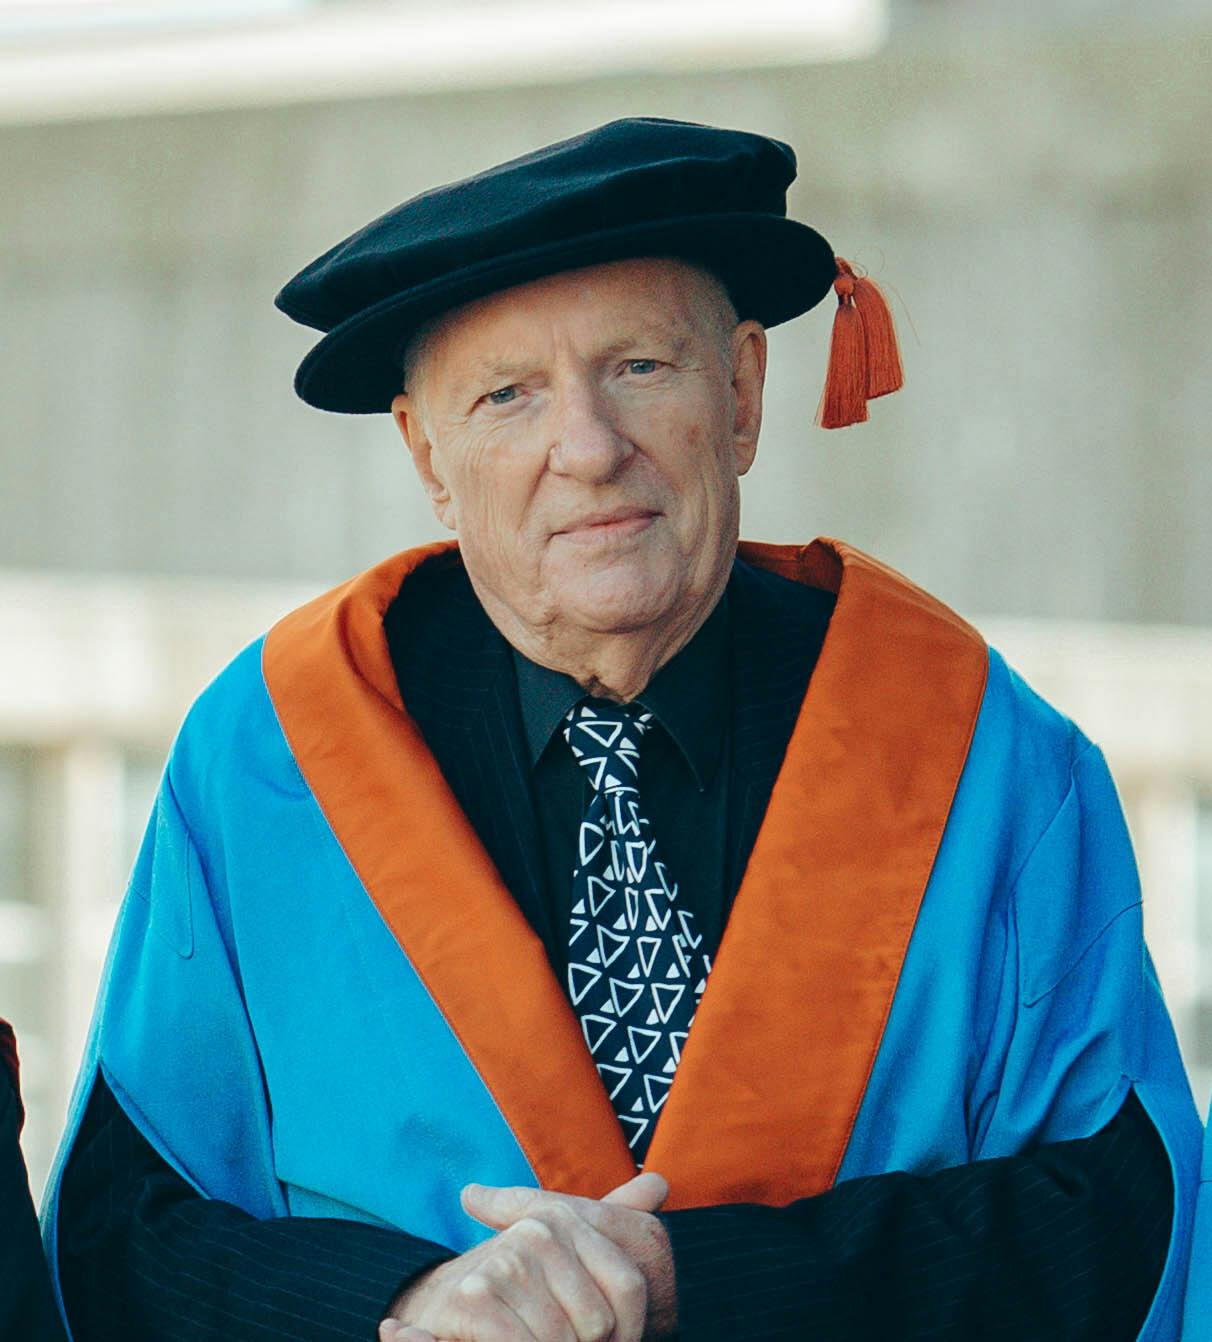 Mike Westbrook OBE receives an Honorary Fellowship from Arts University Plymouth in 2018